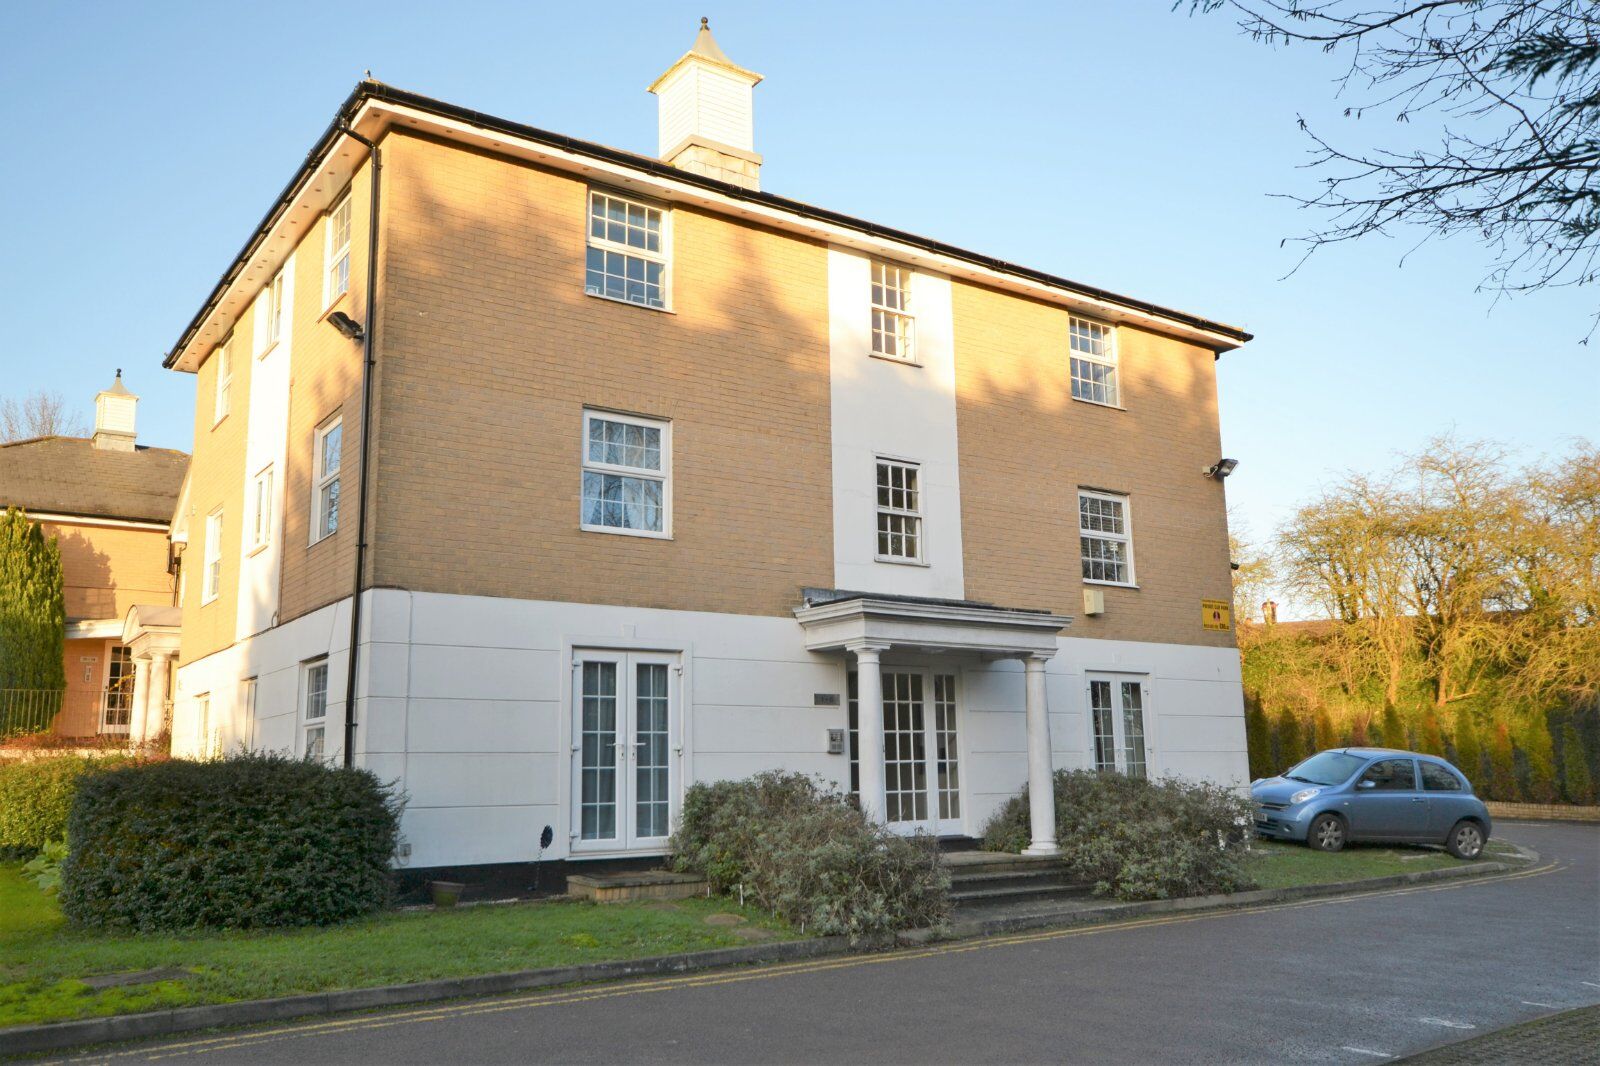 1 bedroom  flat for sale Chelmsford House, Chelmsford Road, CM6, main image